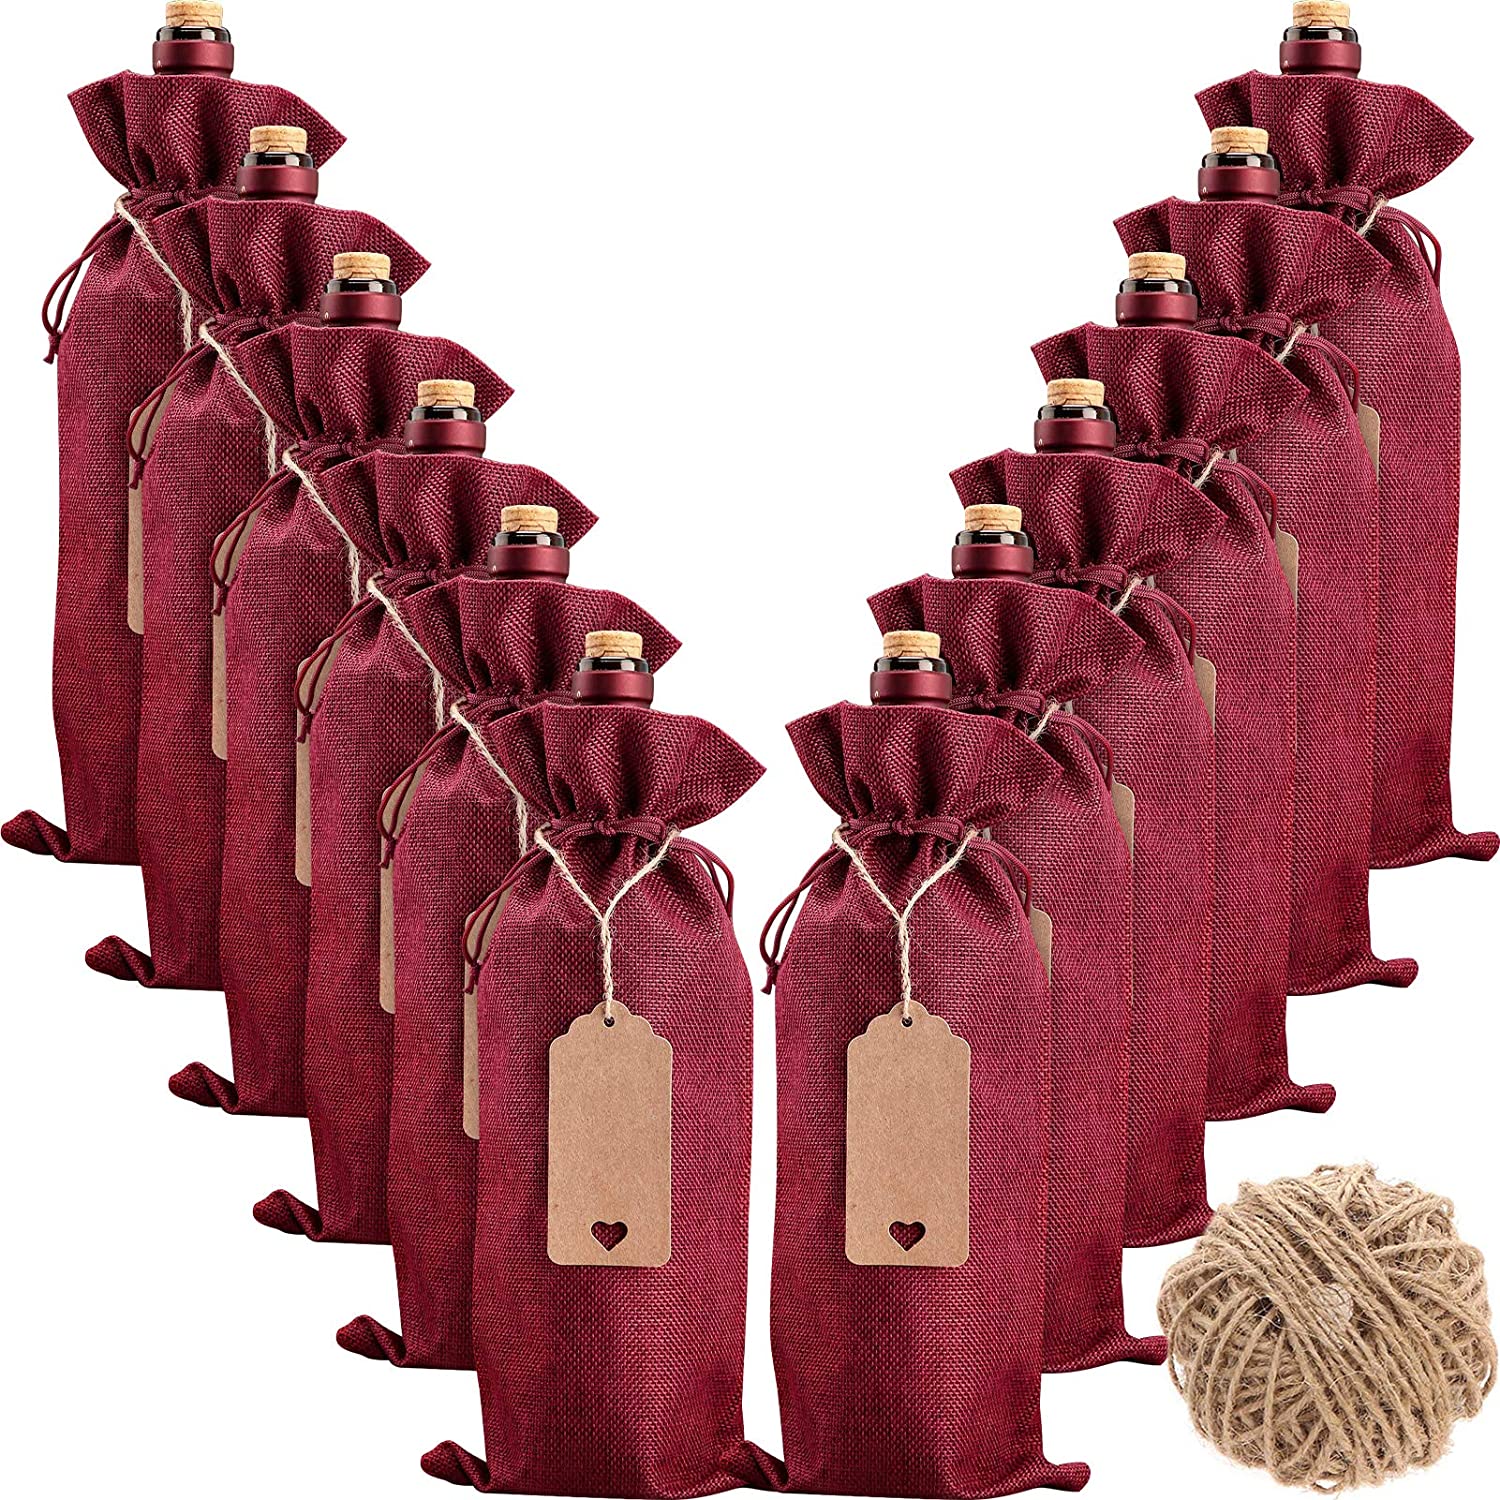 Model number:Burlap Wine Bags Wine Gift Bags, 12 Pcs Wine Bottle Bags with Drawstrings, Tags & Ropes, Reusable Wine Bottle Covers for Christmas, Wedding, Birthday, Travel, Holiday Party, Housewarming, Home Storage Featured Image